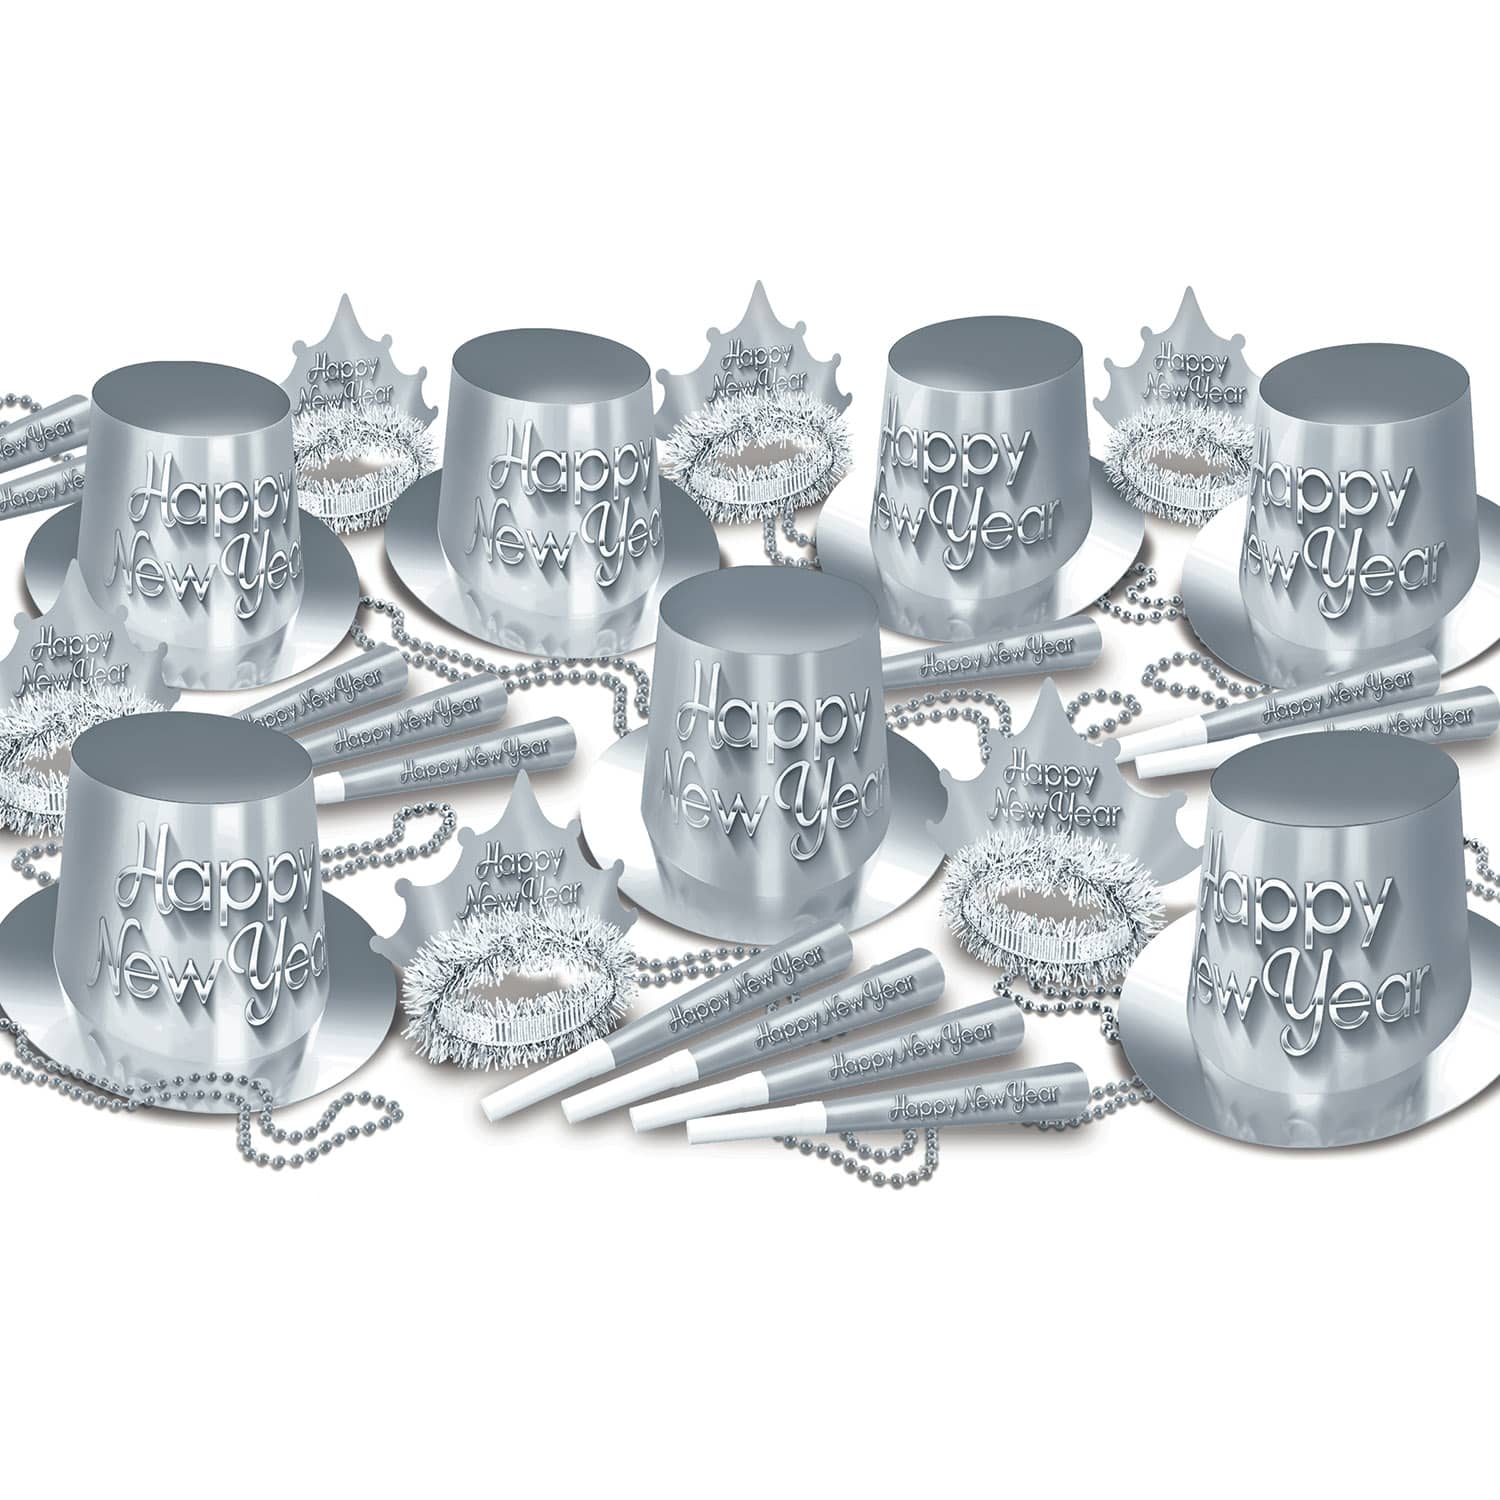 Silver New Year Assortment for 50   Silver New Year Assortment for 50 , 2022, silver, new years eve, party kit, hat, tiara, horn, bead, wholesale, inexpensive, bulk, party favor